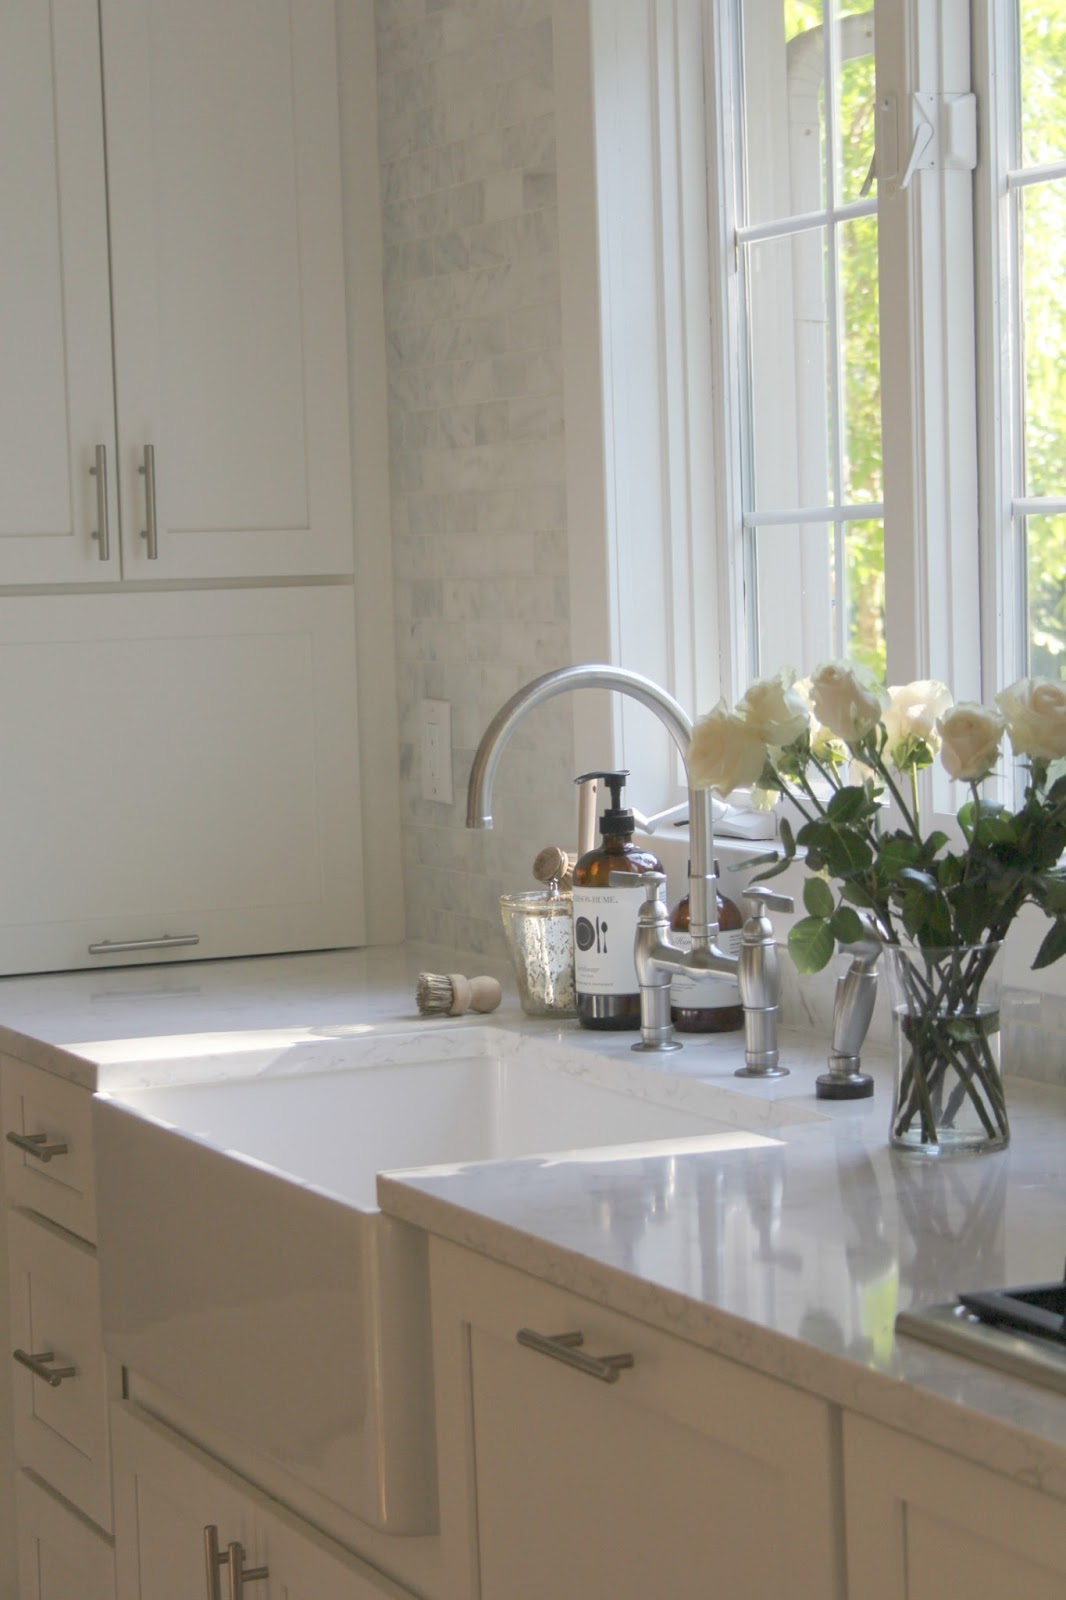 How To Choose The Right White Quartz For Kitchen Countertops